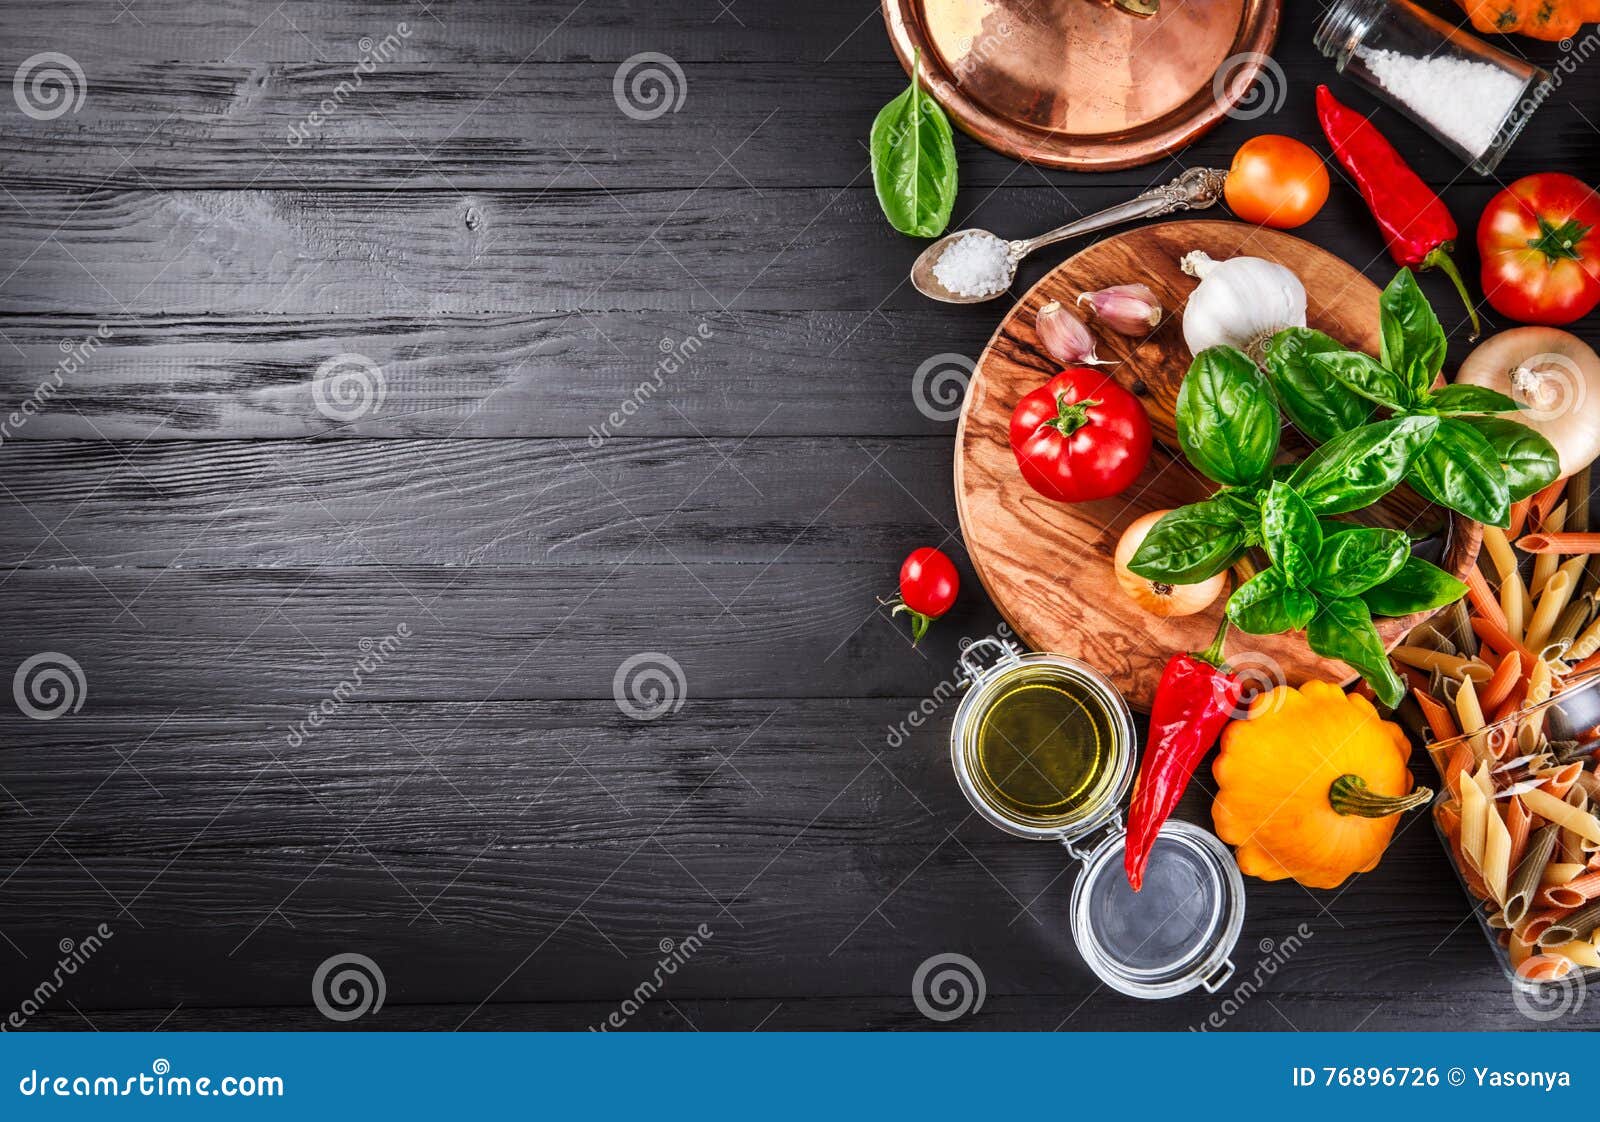 Vegetables and Spices Ingredient for Cooking Italian Food Stock Photo ...